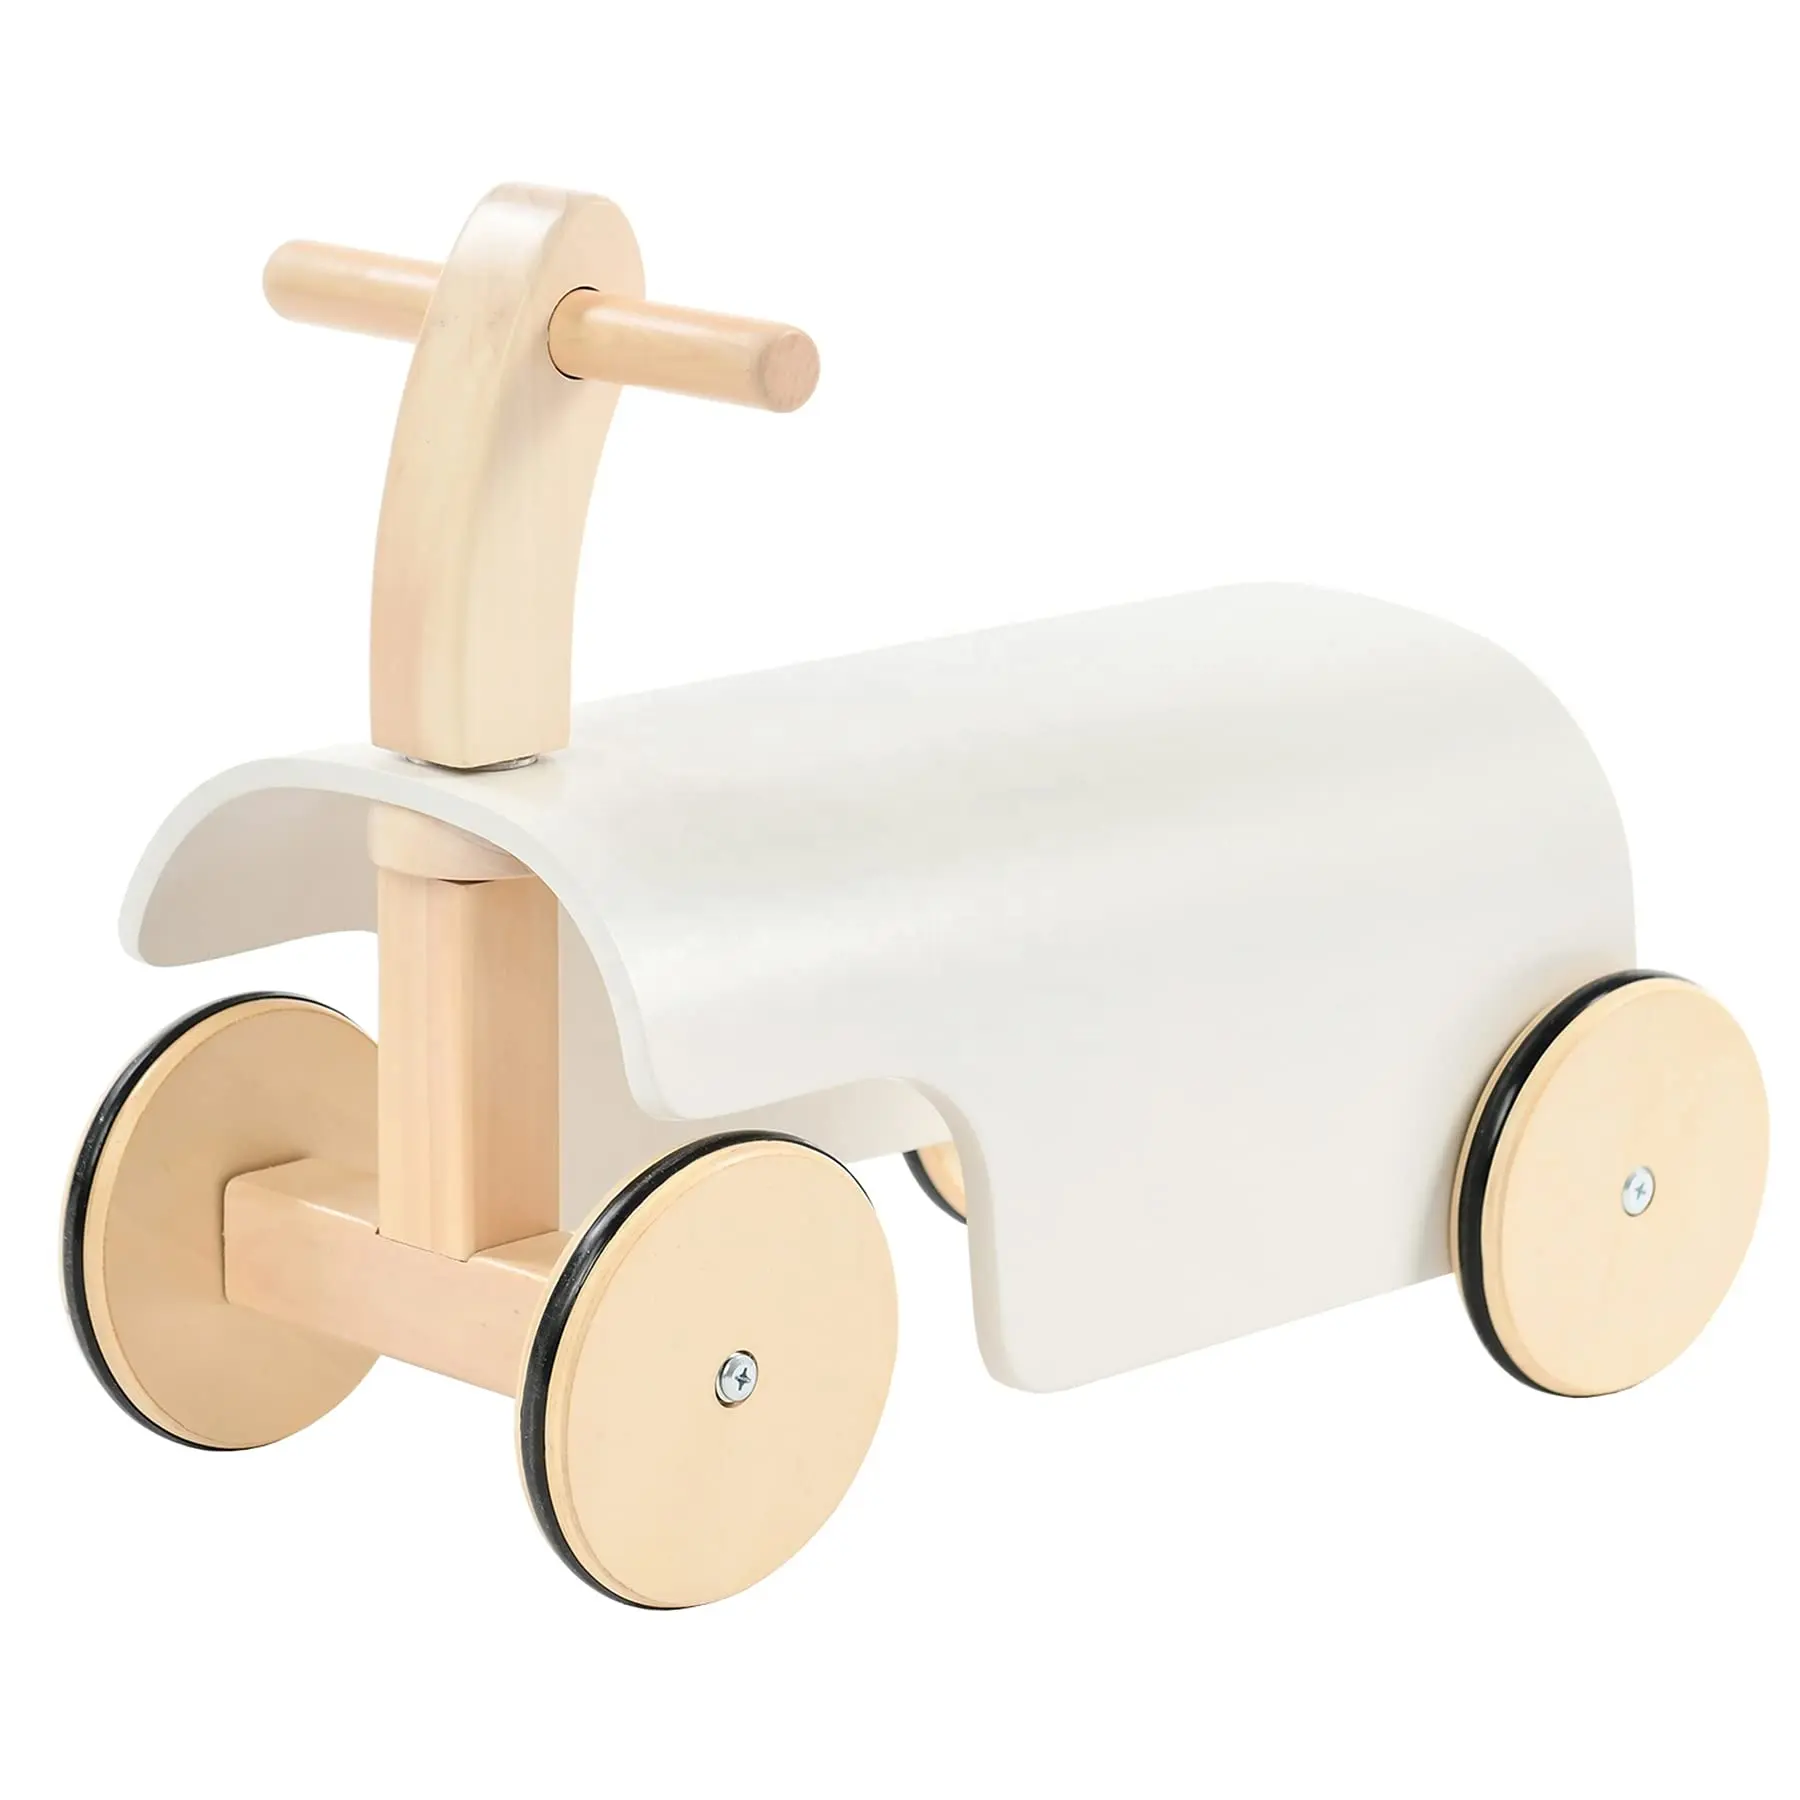 2022 Baby Wooden 2 In 1 Saddle Balance Push Walker Toy bambini In legno Balance Bike Kids Ride-on Toys con ruote per bambini